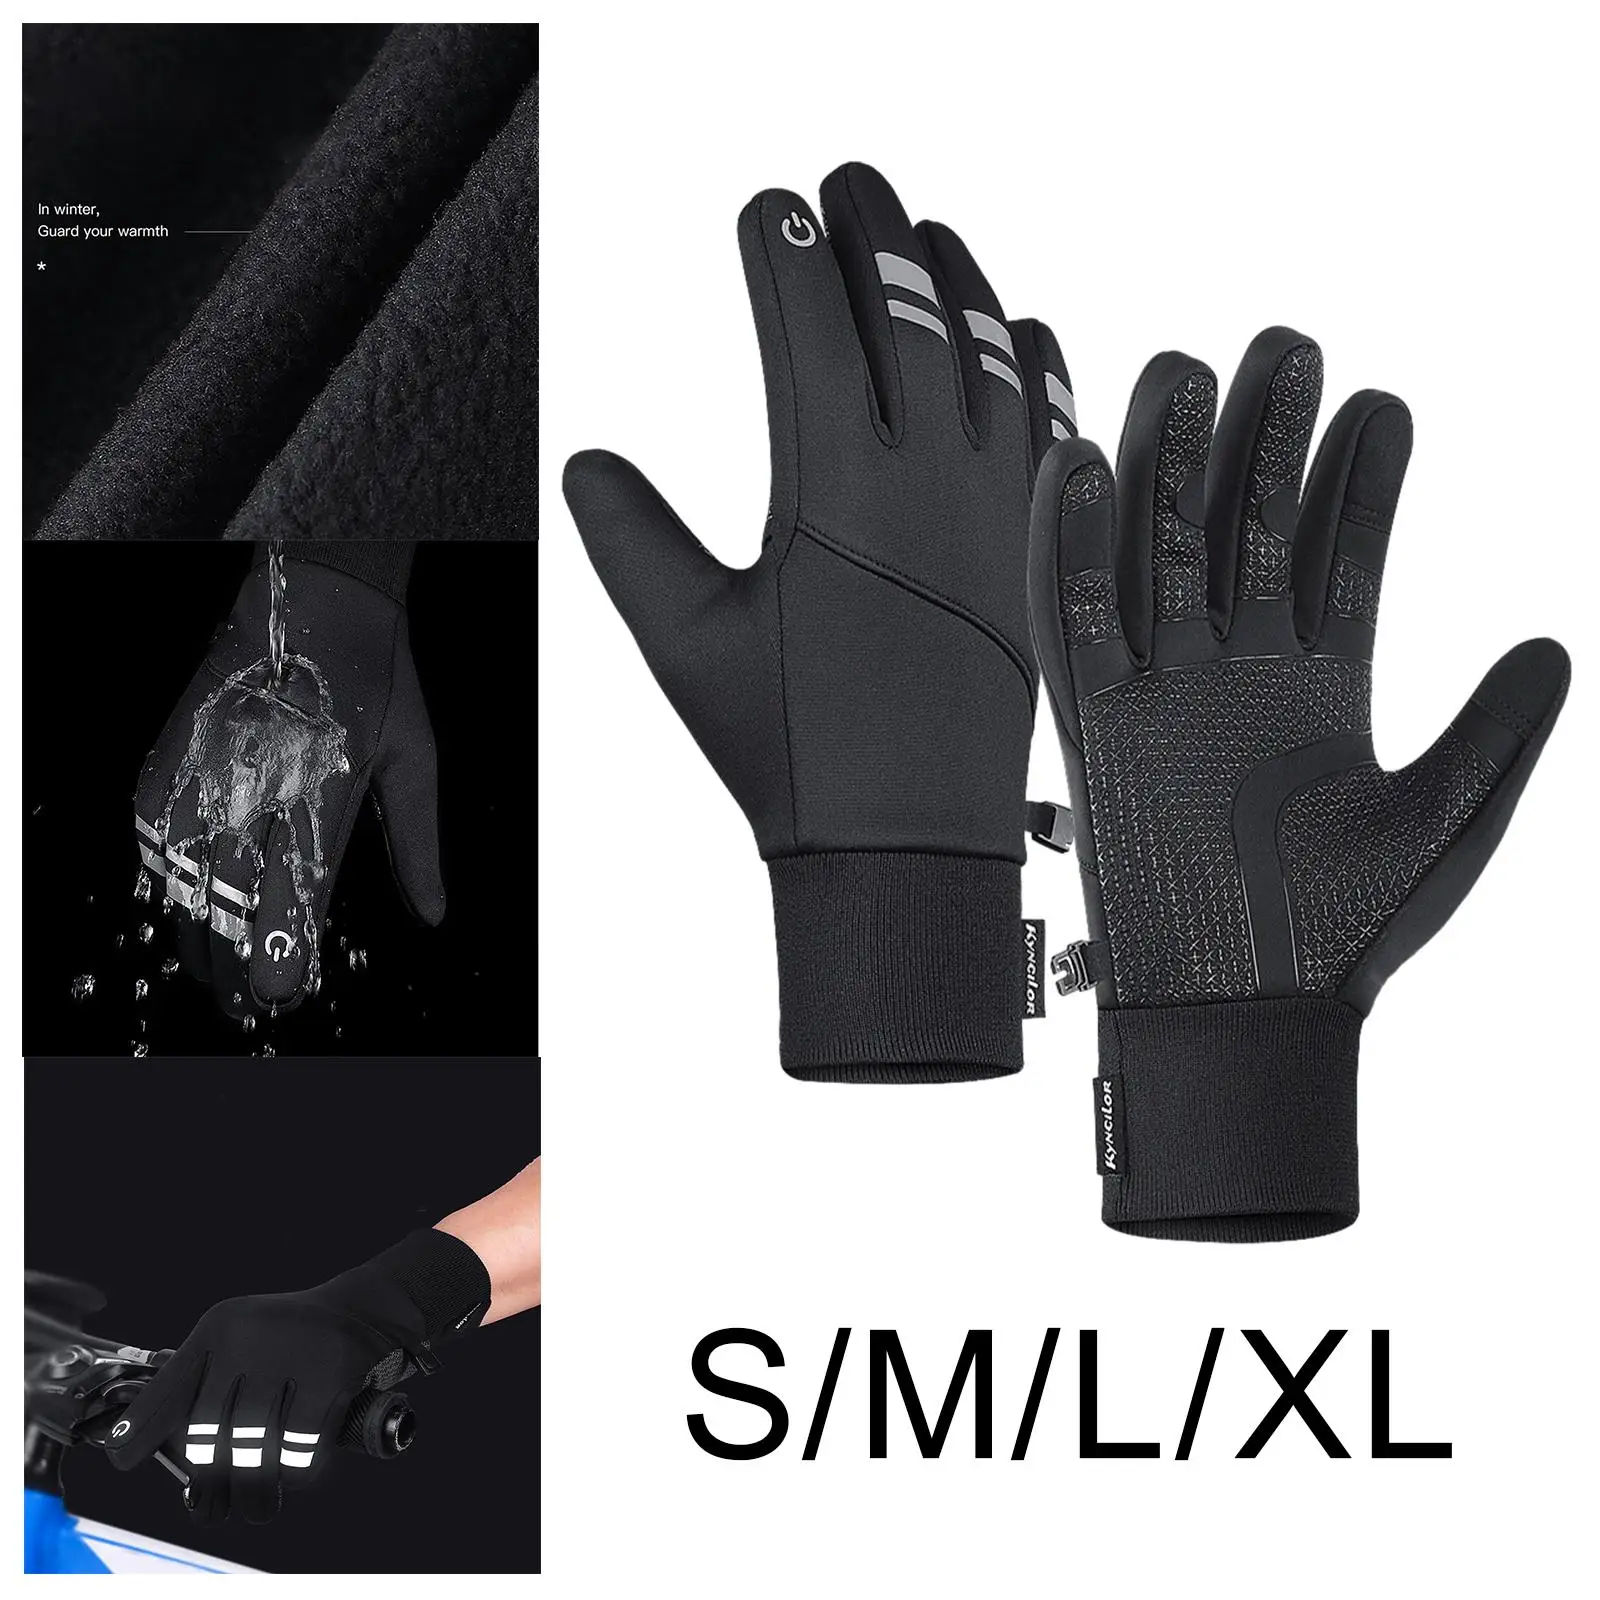 Cycling Gloves Winter Ski Gloves, Touch Screen Motorcycle Gloves, Waterproof Lightweight Warm Mittens for Skiing